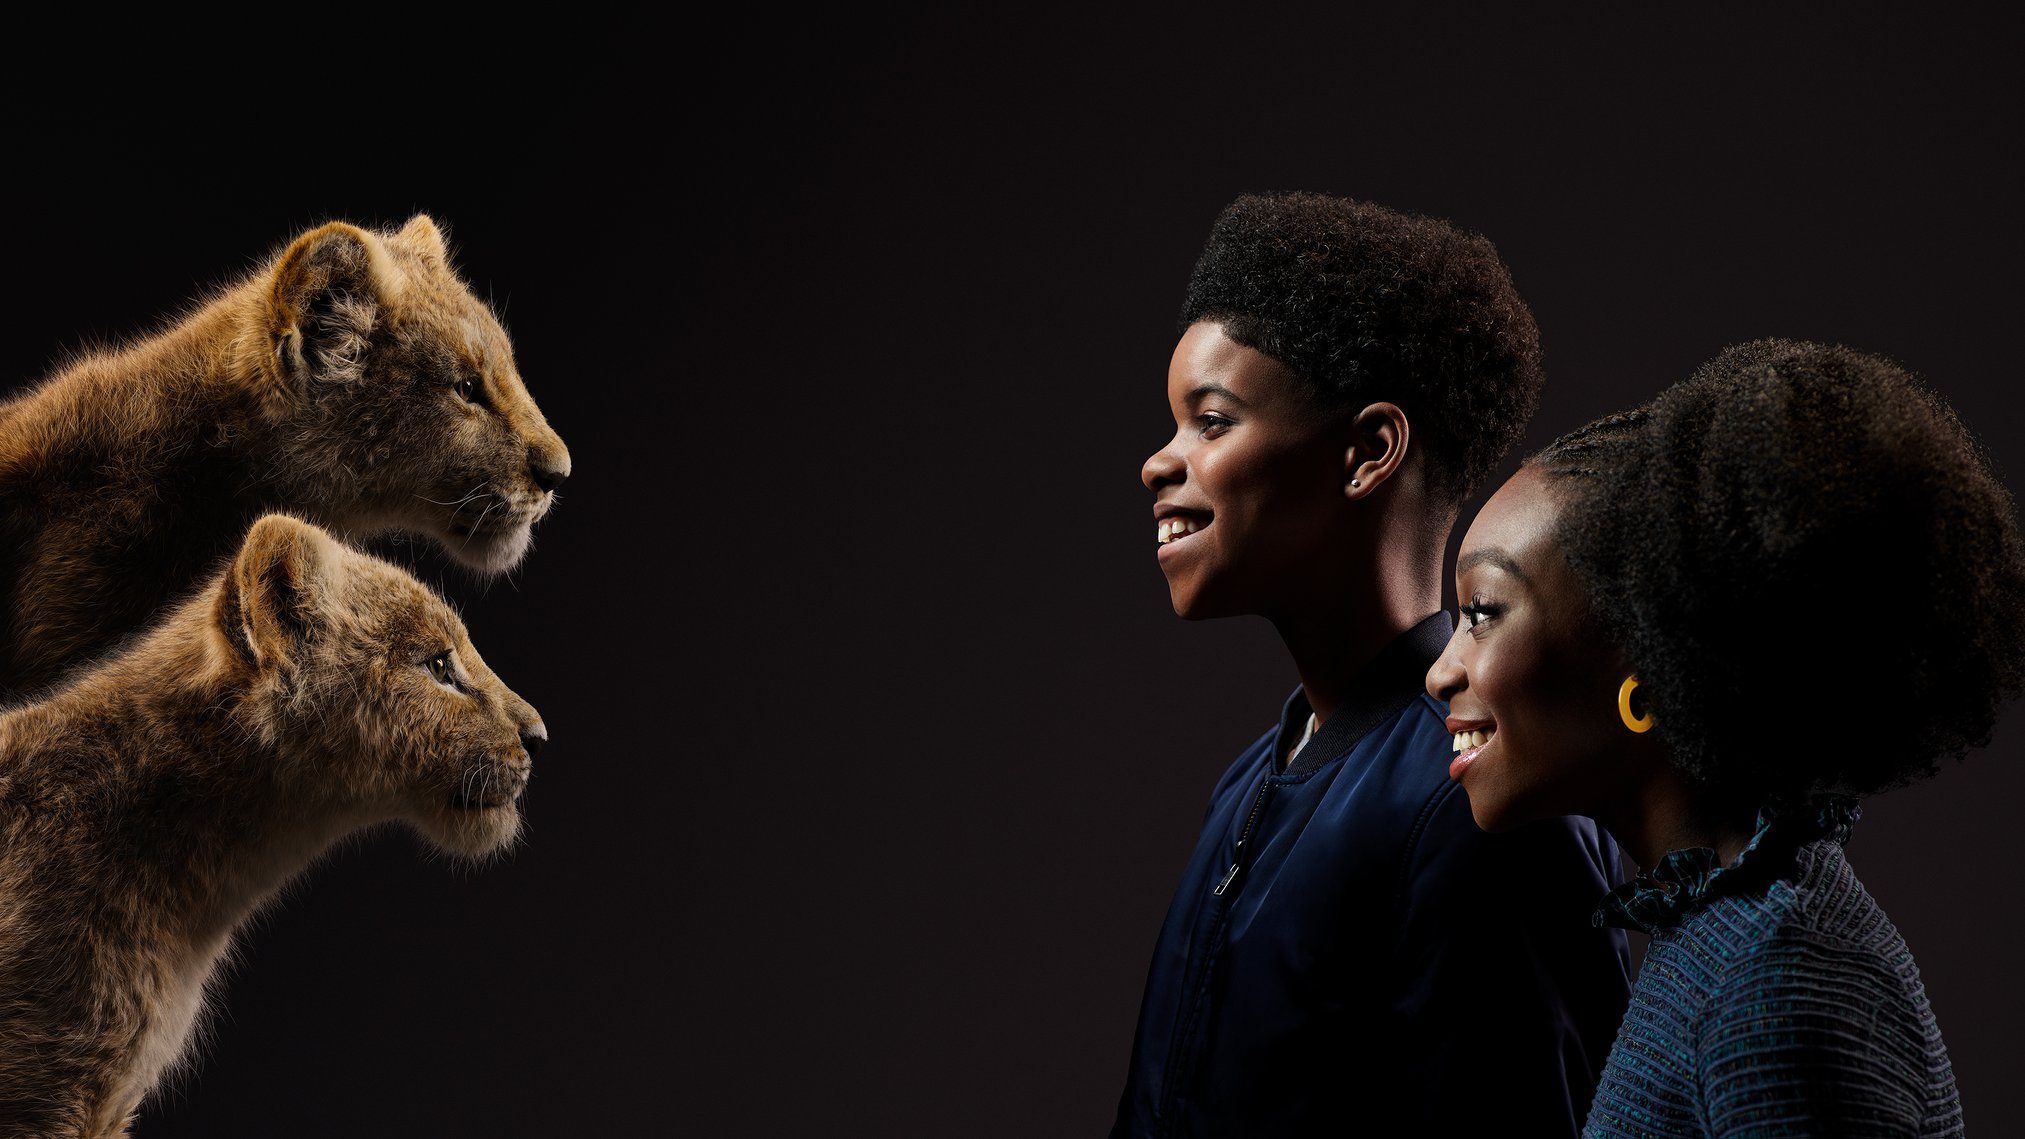 YOUNG TALENT. Shahadi Wright Joseph and JD McCrary are Young Nala and Young Simba. Photo from Facebook/The Lion King/Disney 